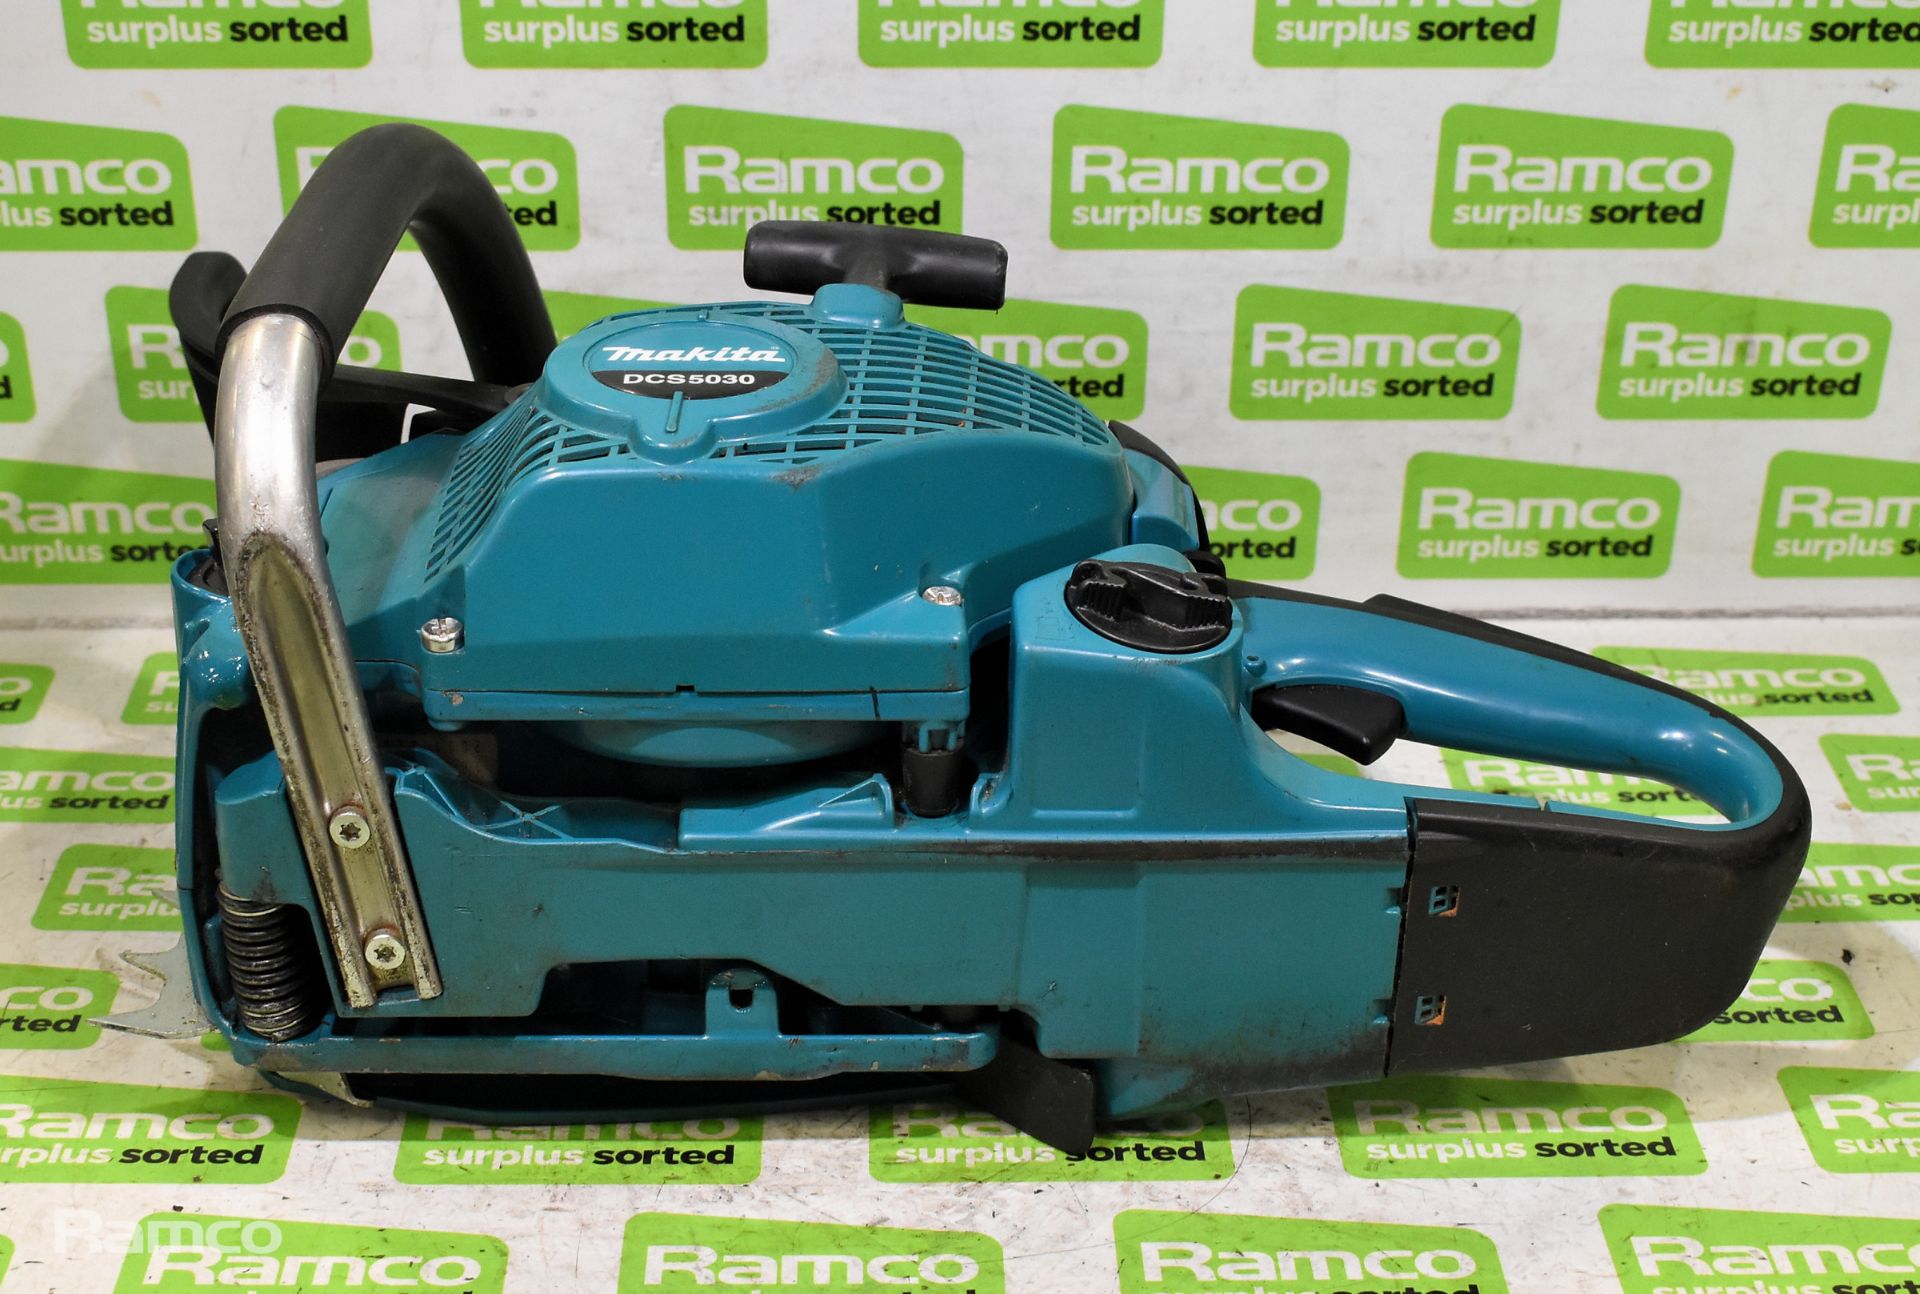 3x Makita DCS5030 50cc petrol chainsaw - BODIES ONLY - AS SPARES AND REPAIRS, 1x Makita EA5000P - Image 22 of 22